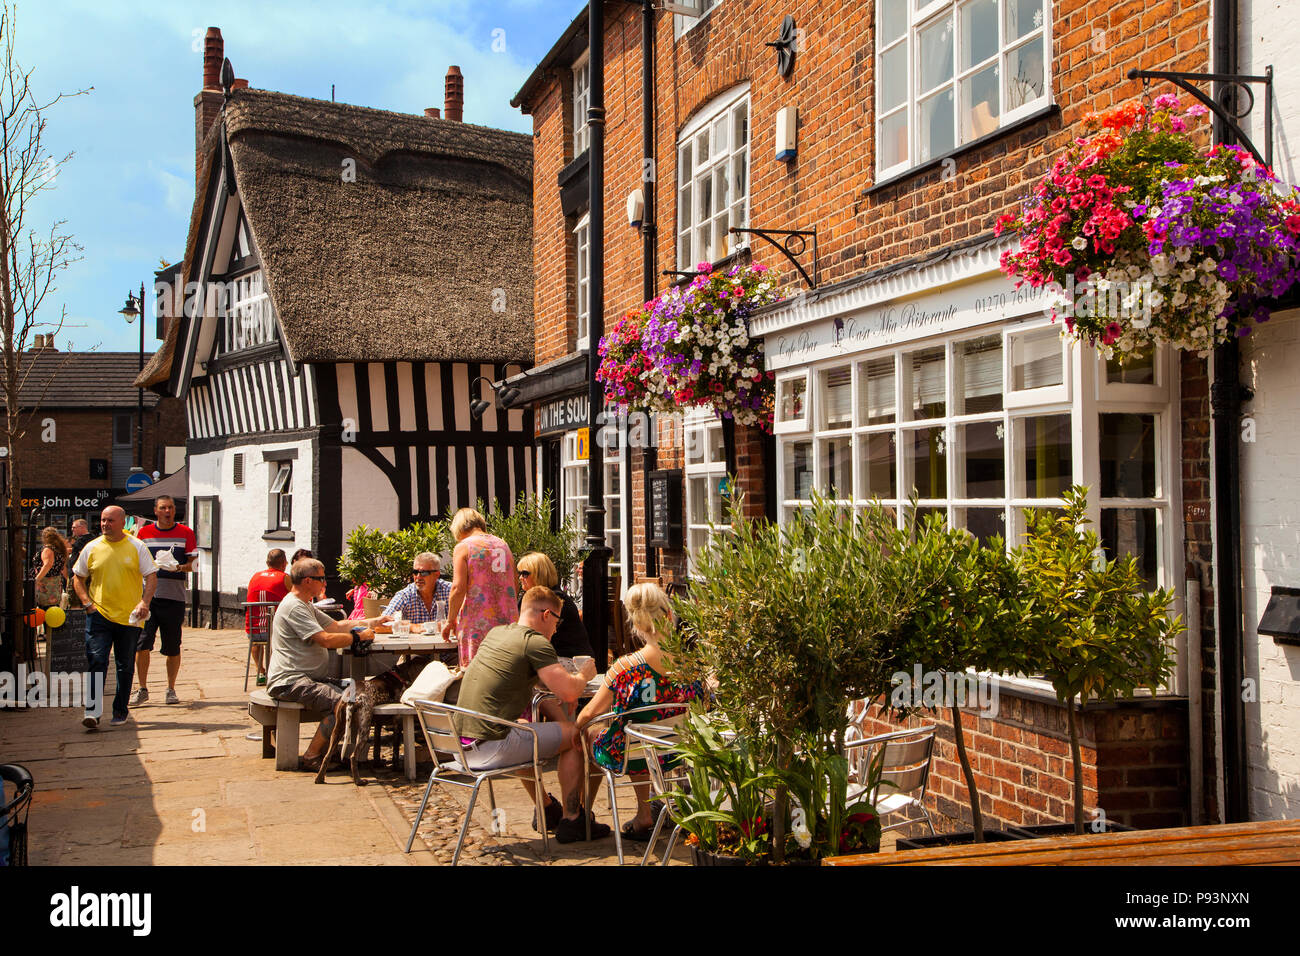 People men and women enjoying the summer sunshine eating and drinking outside at pavement cafe in the market town of Sandbach in Cheshire England UK Stock Photo